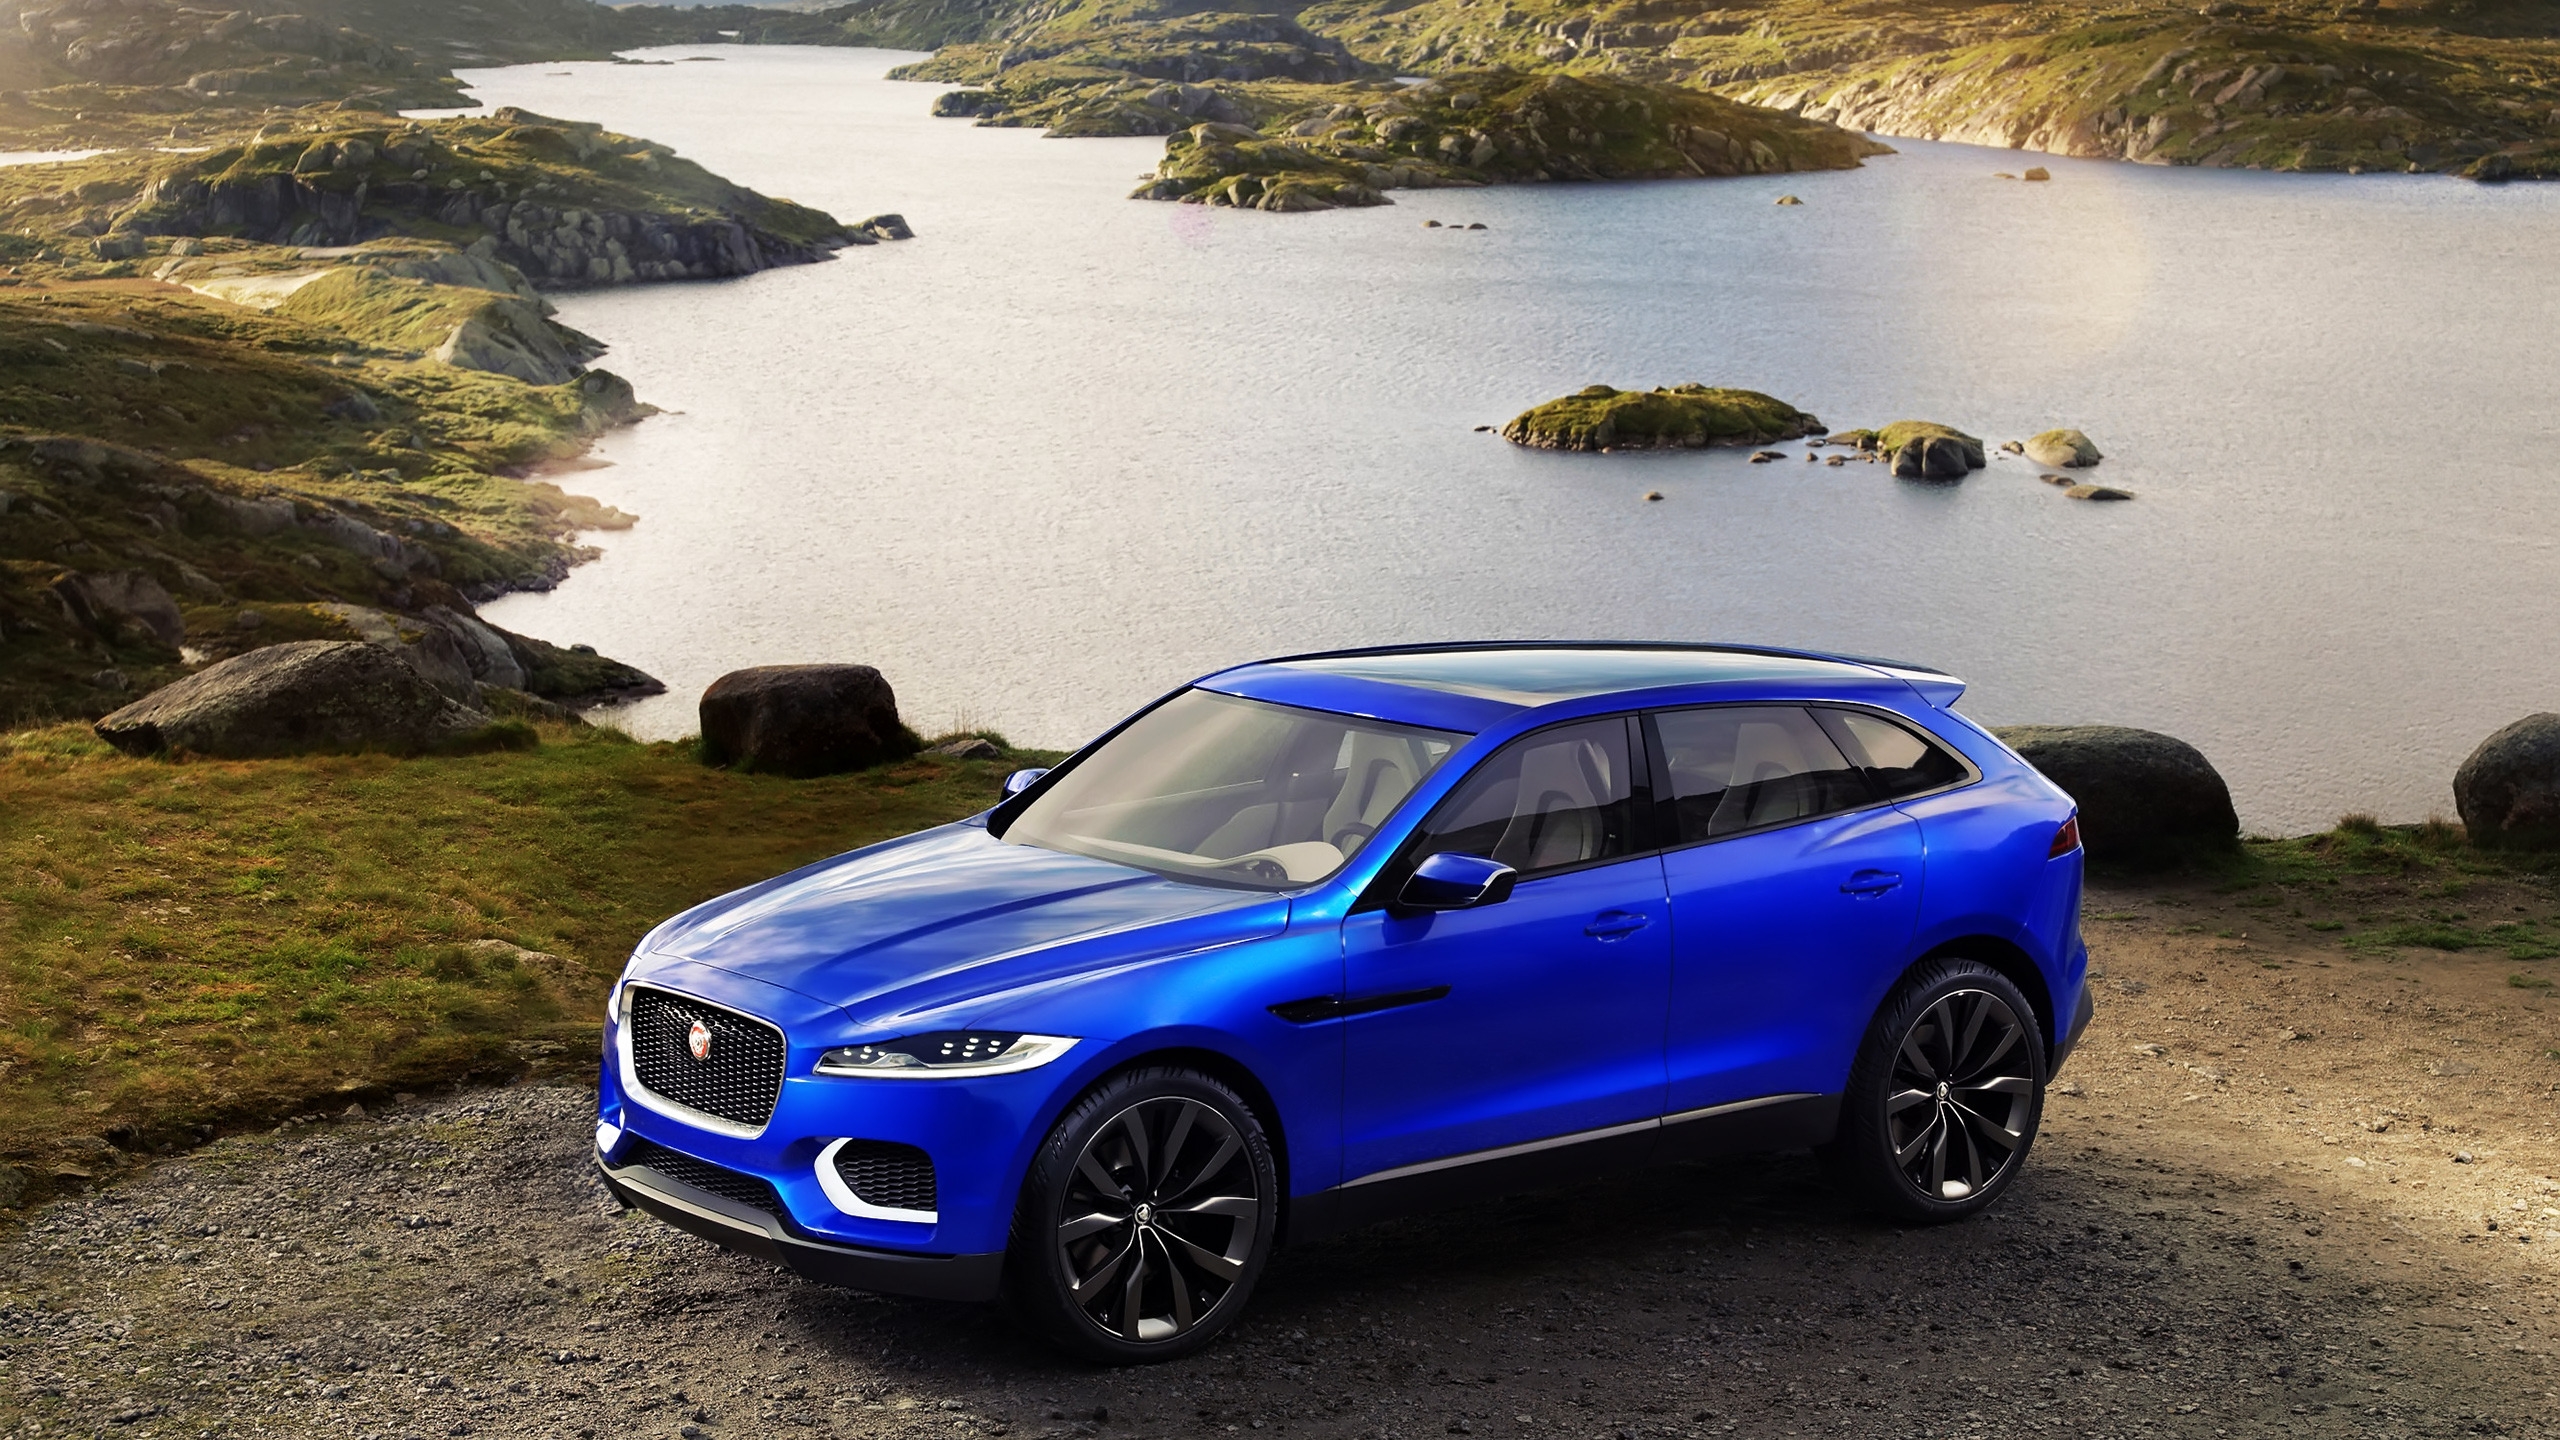 Beautiful Jaguar Crossover Concept for 2560x1440 HDTV resolution